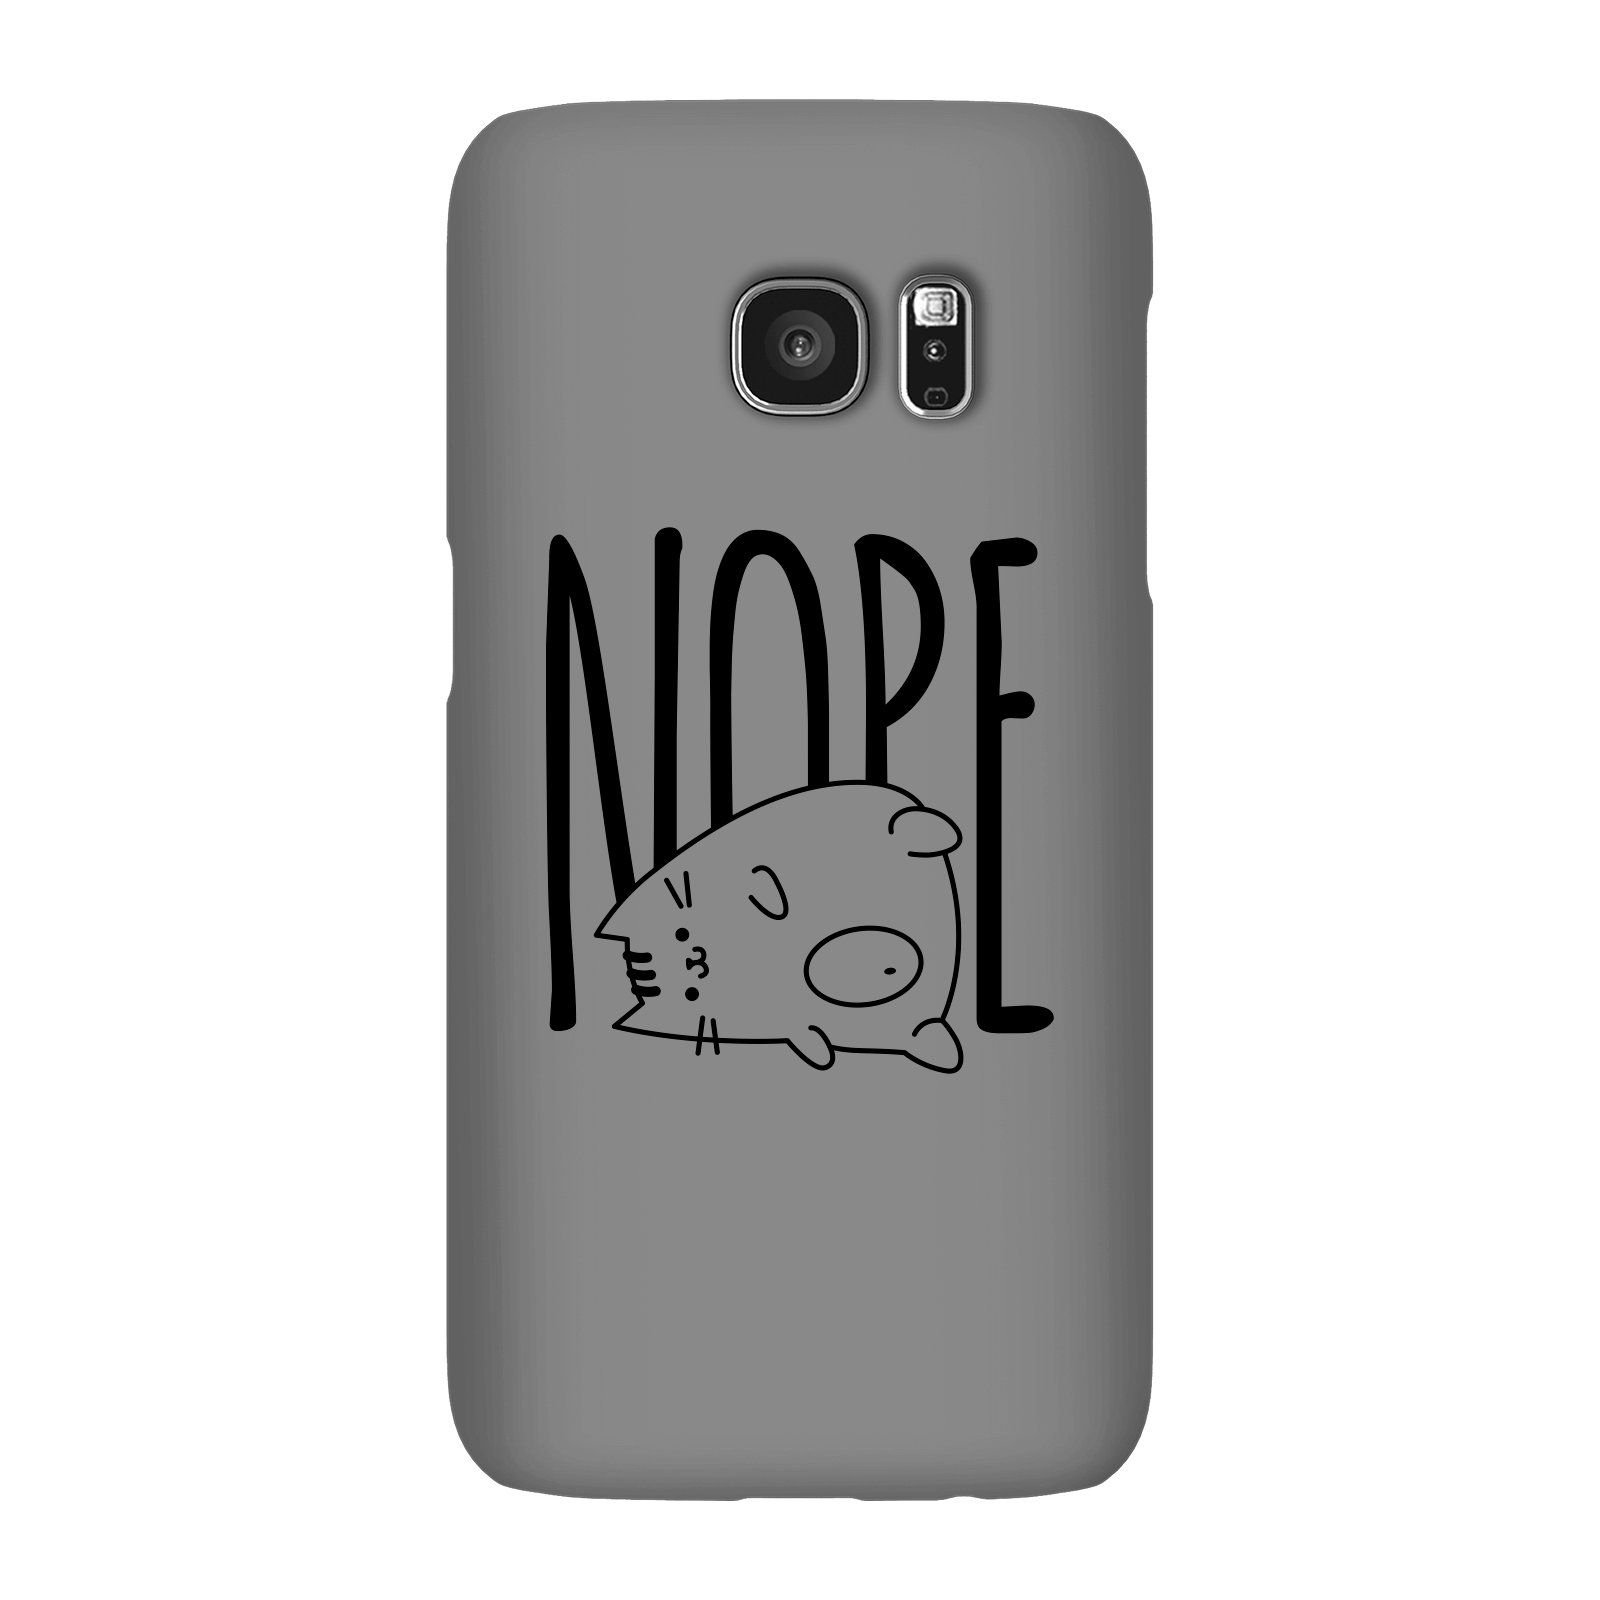 Nope Phone Case for iPhone and Android - Samsung S7 - Snap Case - Matte